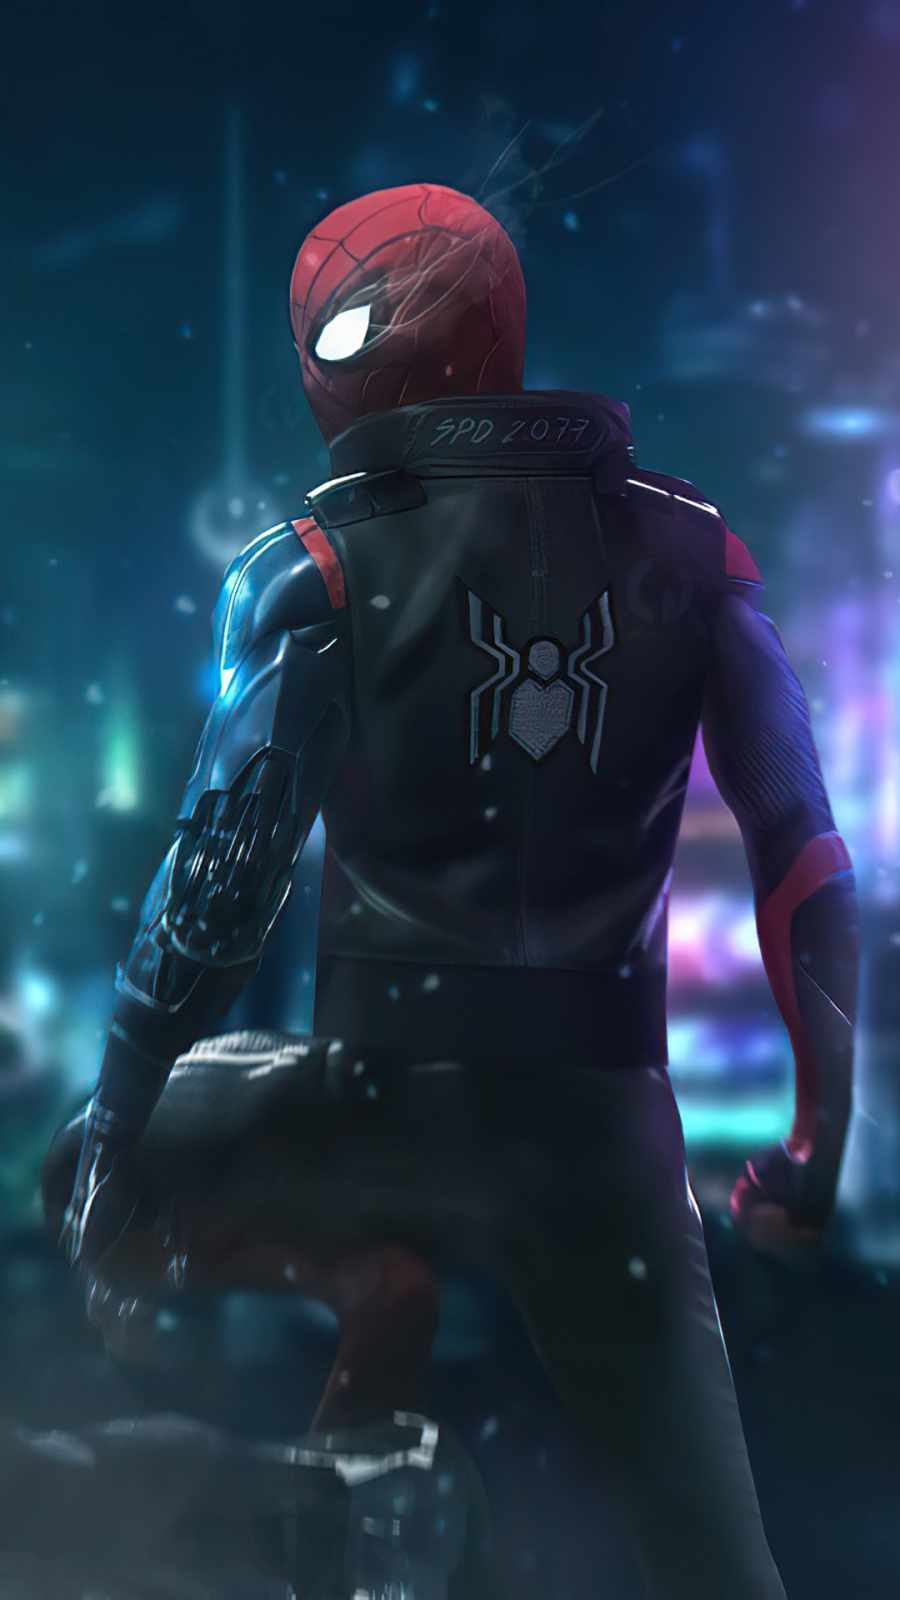 Cyberpunk Spider Man - IPhone Wallpapers : iPhone Wallpapers